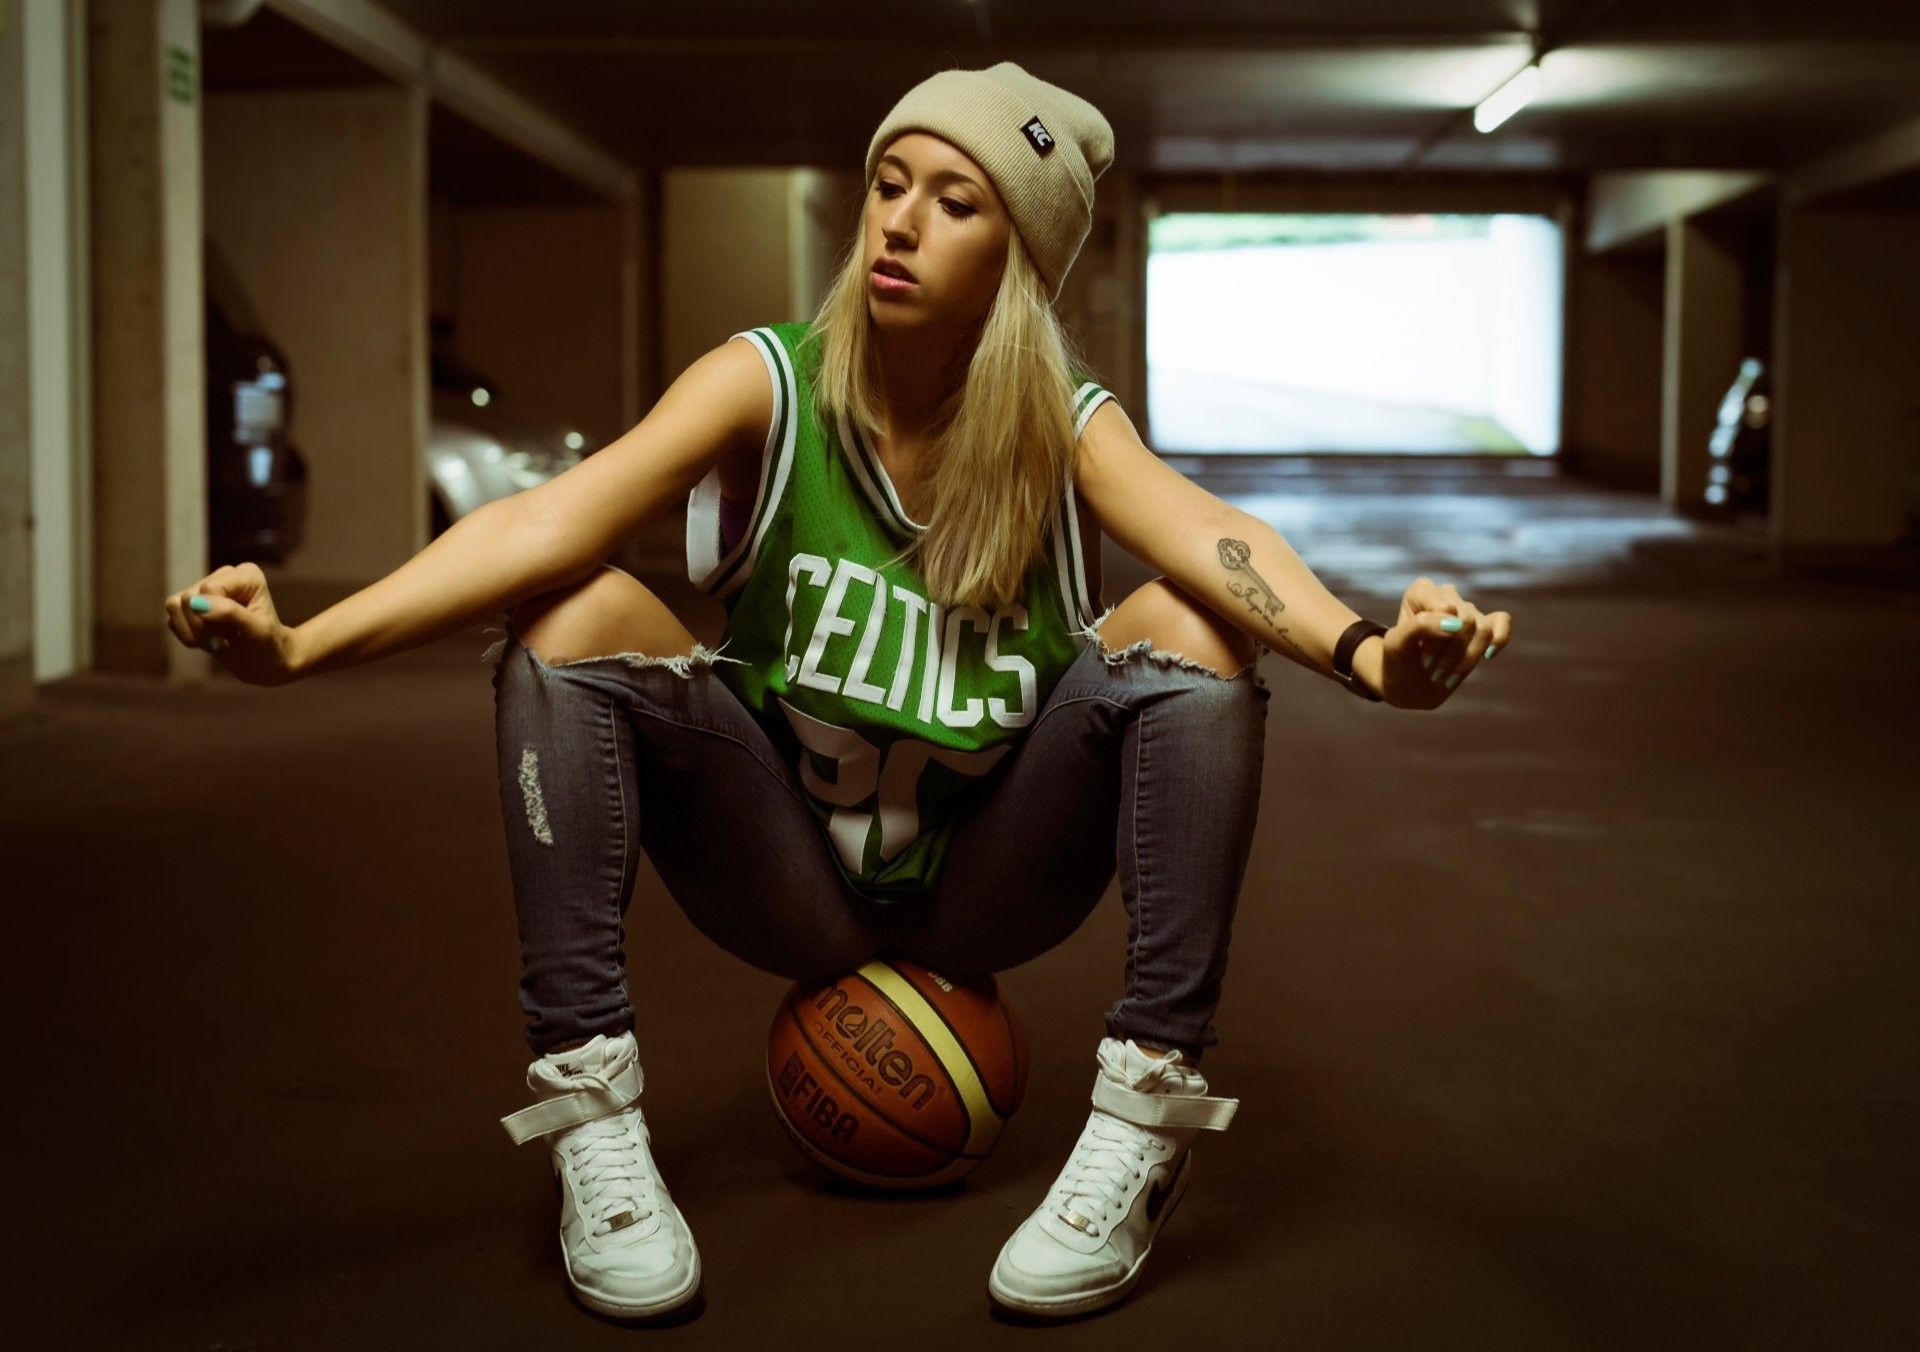 A woman sitting on the floor with her hands in prayer - Basketball